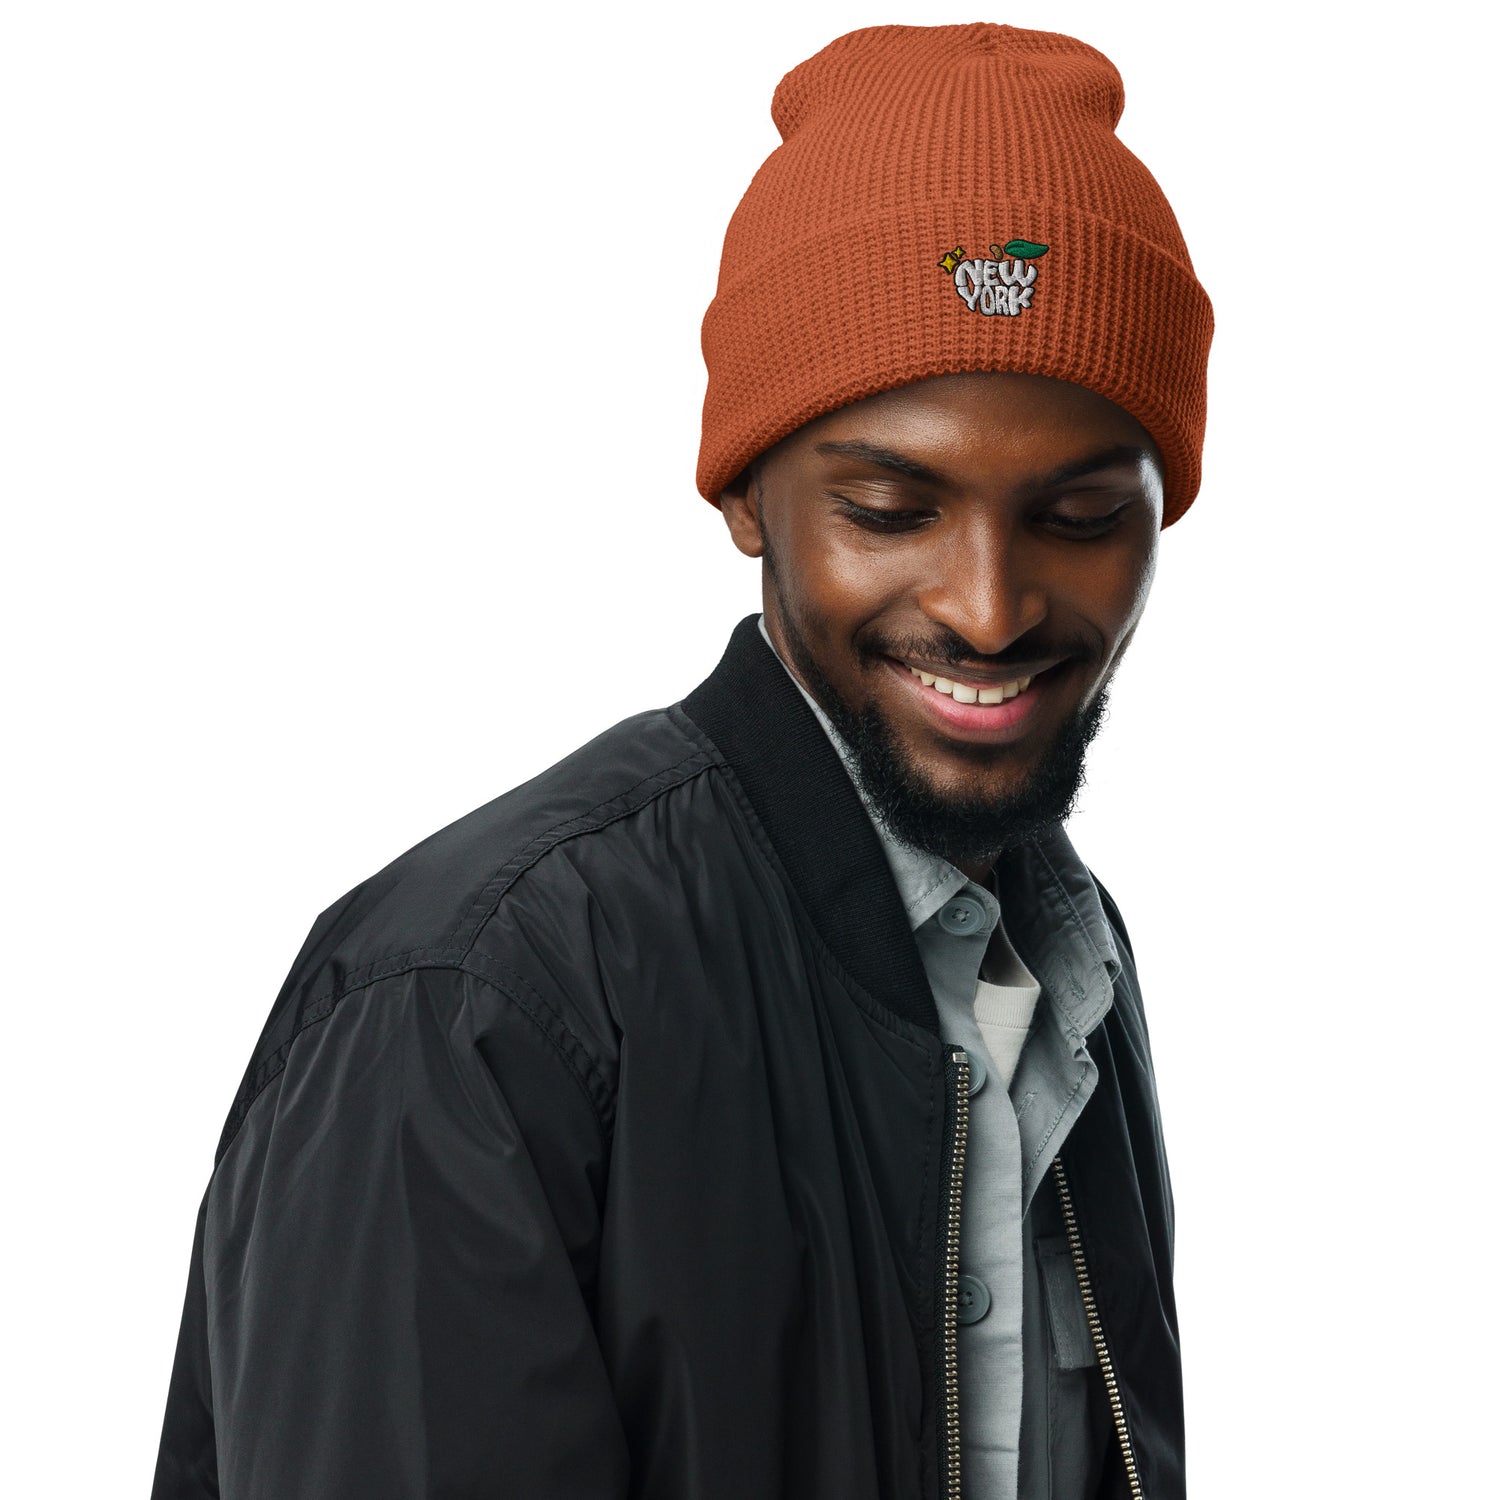 New York Apple Logo Embroidered Rust Orange Waffle Beanie Hat Scattered Streetwear